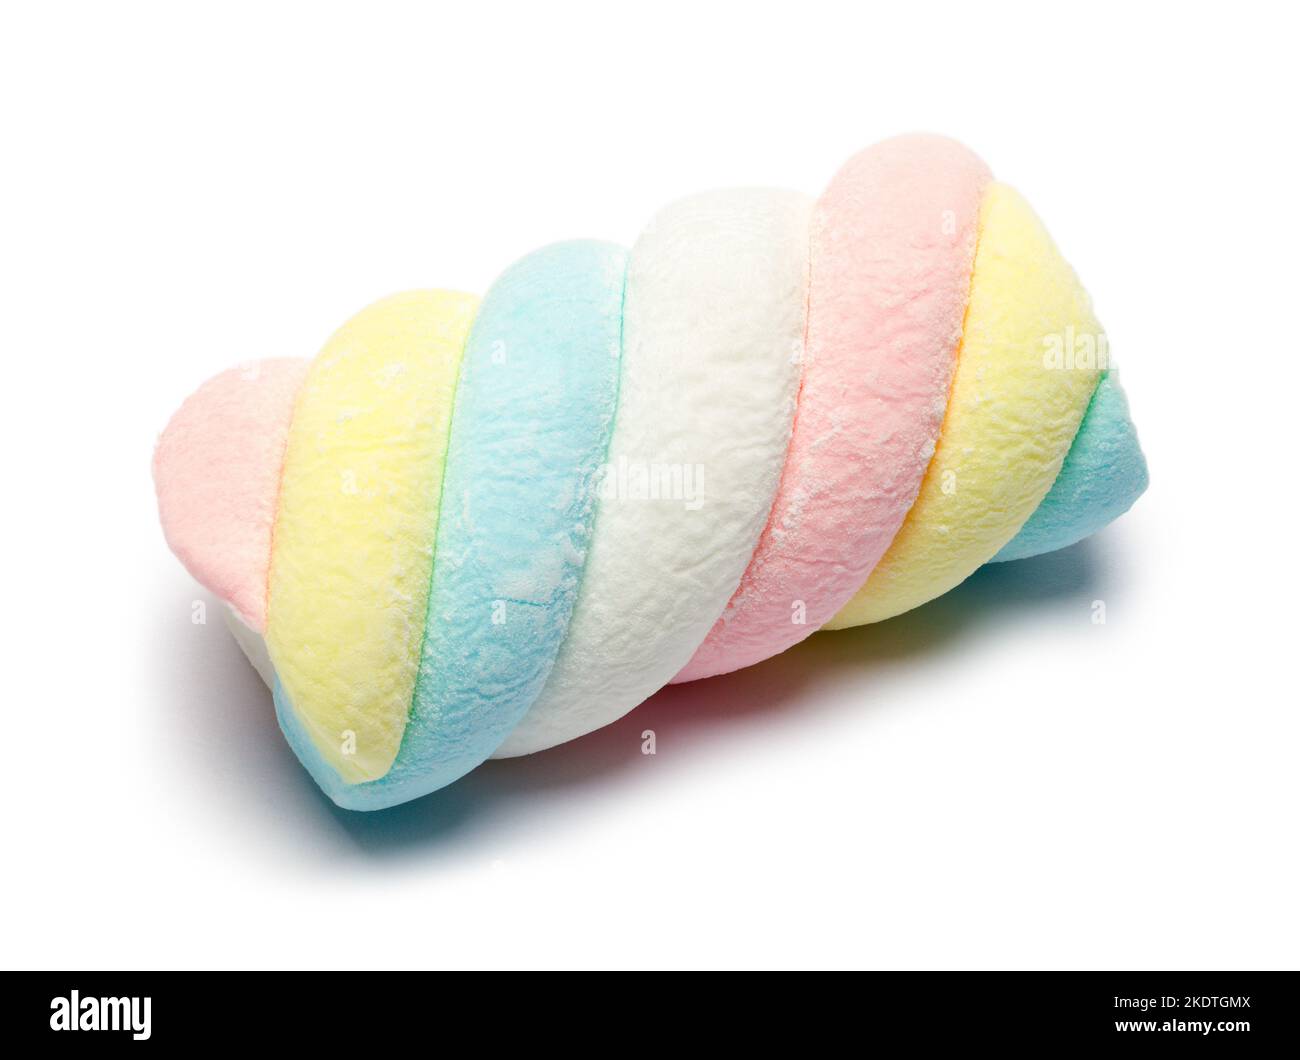 Soft Colorful Spiral Marshmellow Cut Out on White. Stock Photo